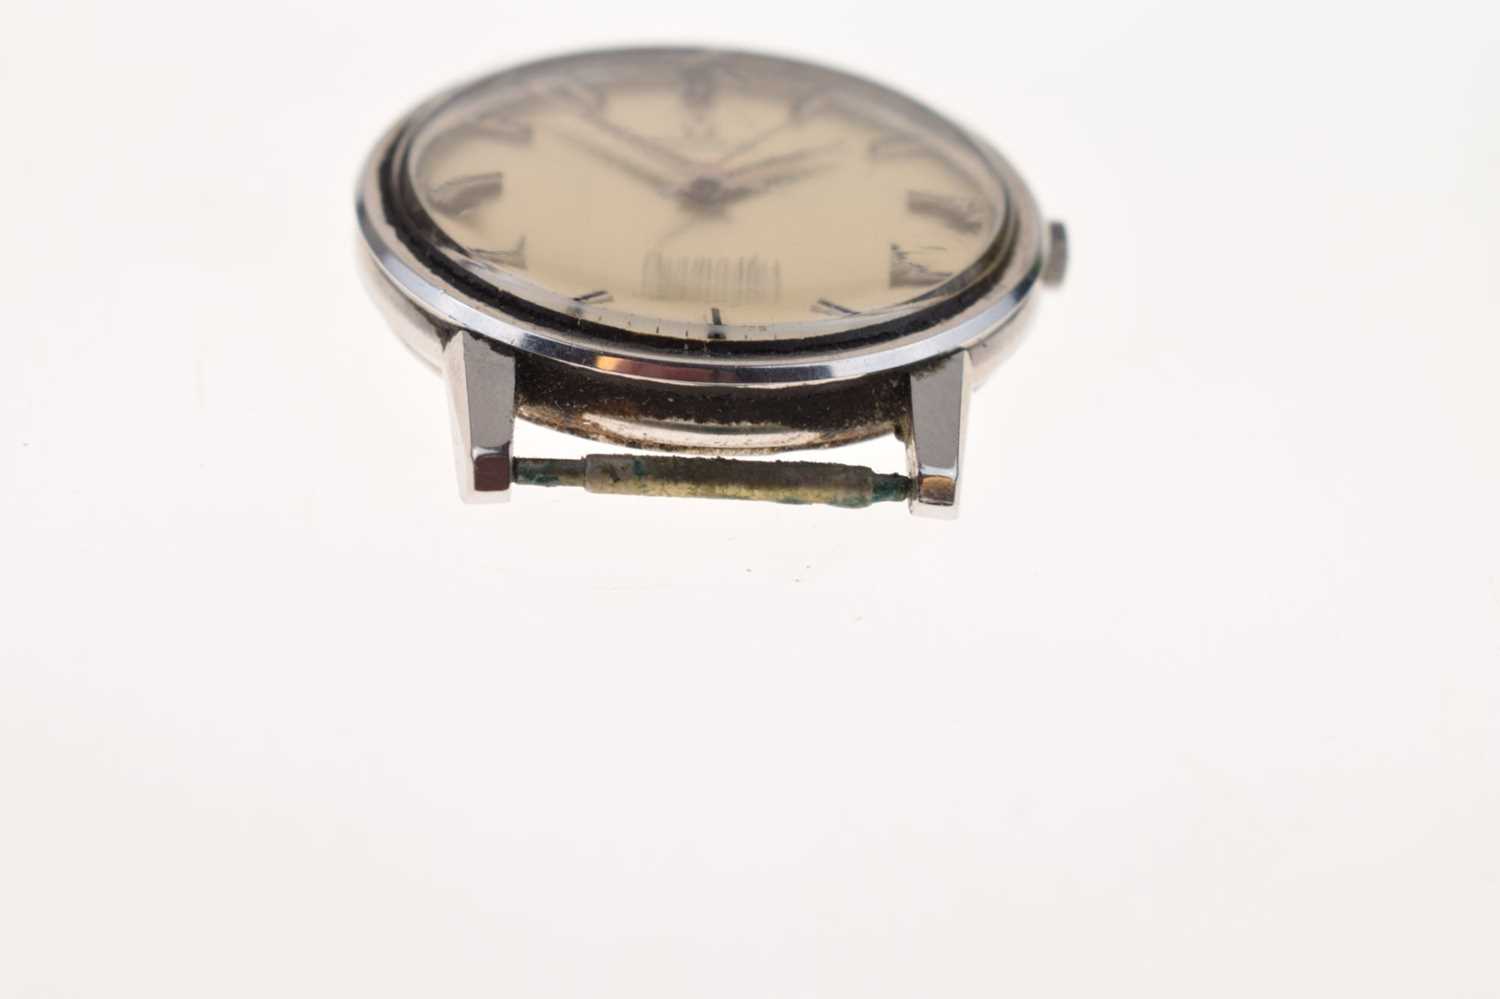 Omega - Gentleman's 1970s Seamaster Automatic watch head - Image 7 of 9